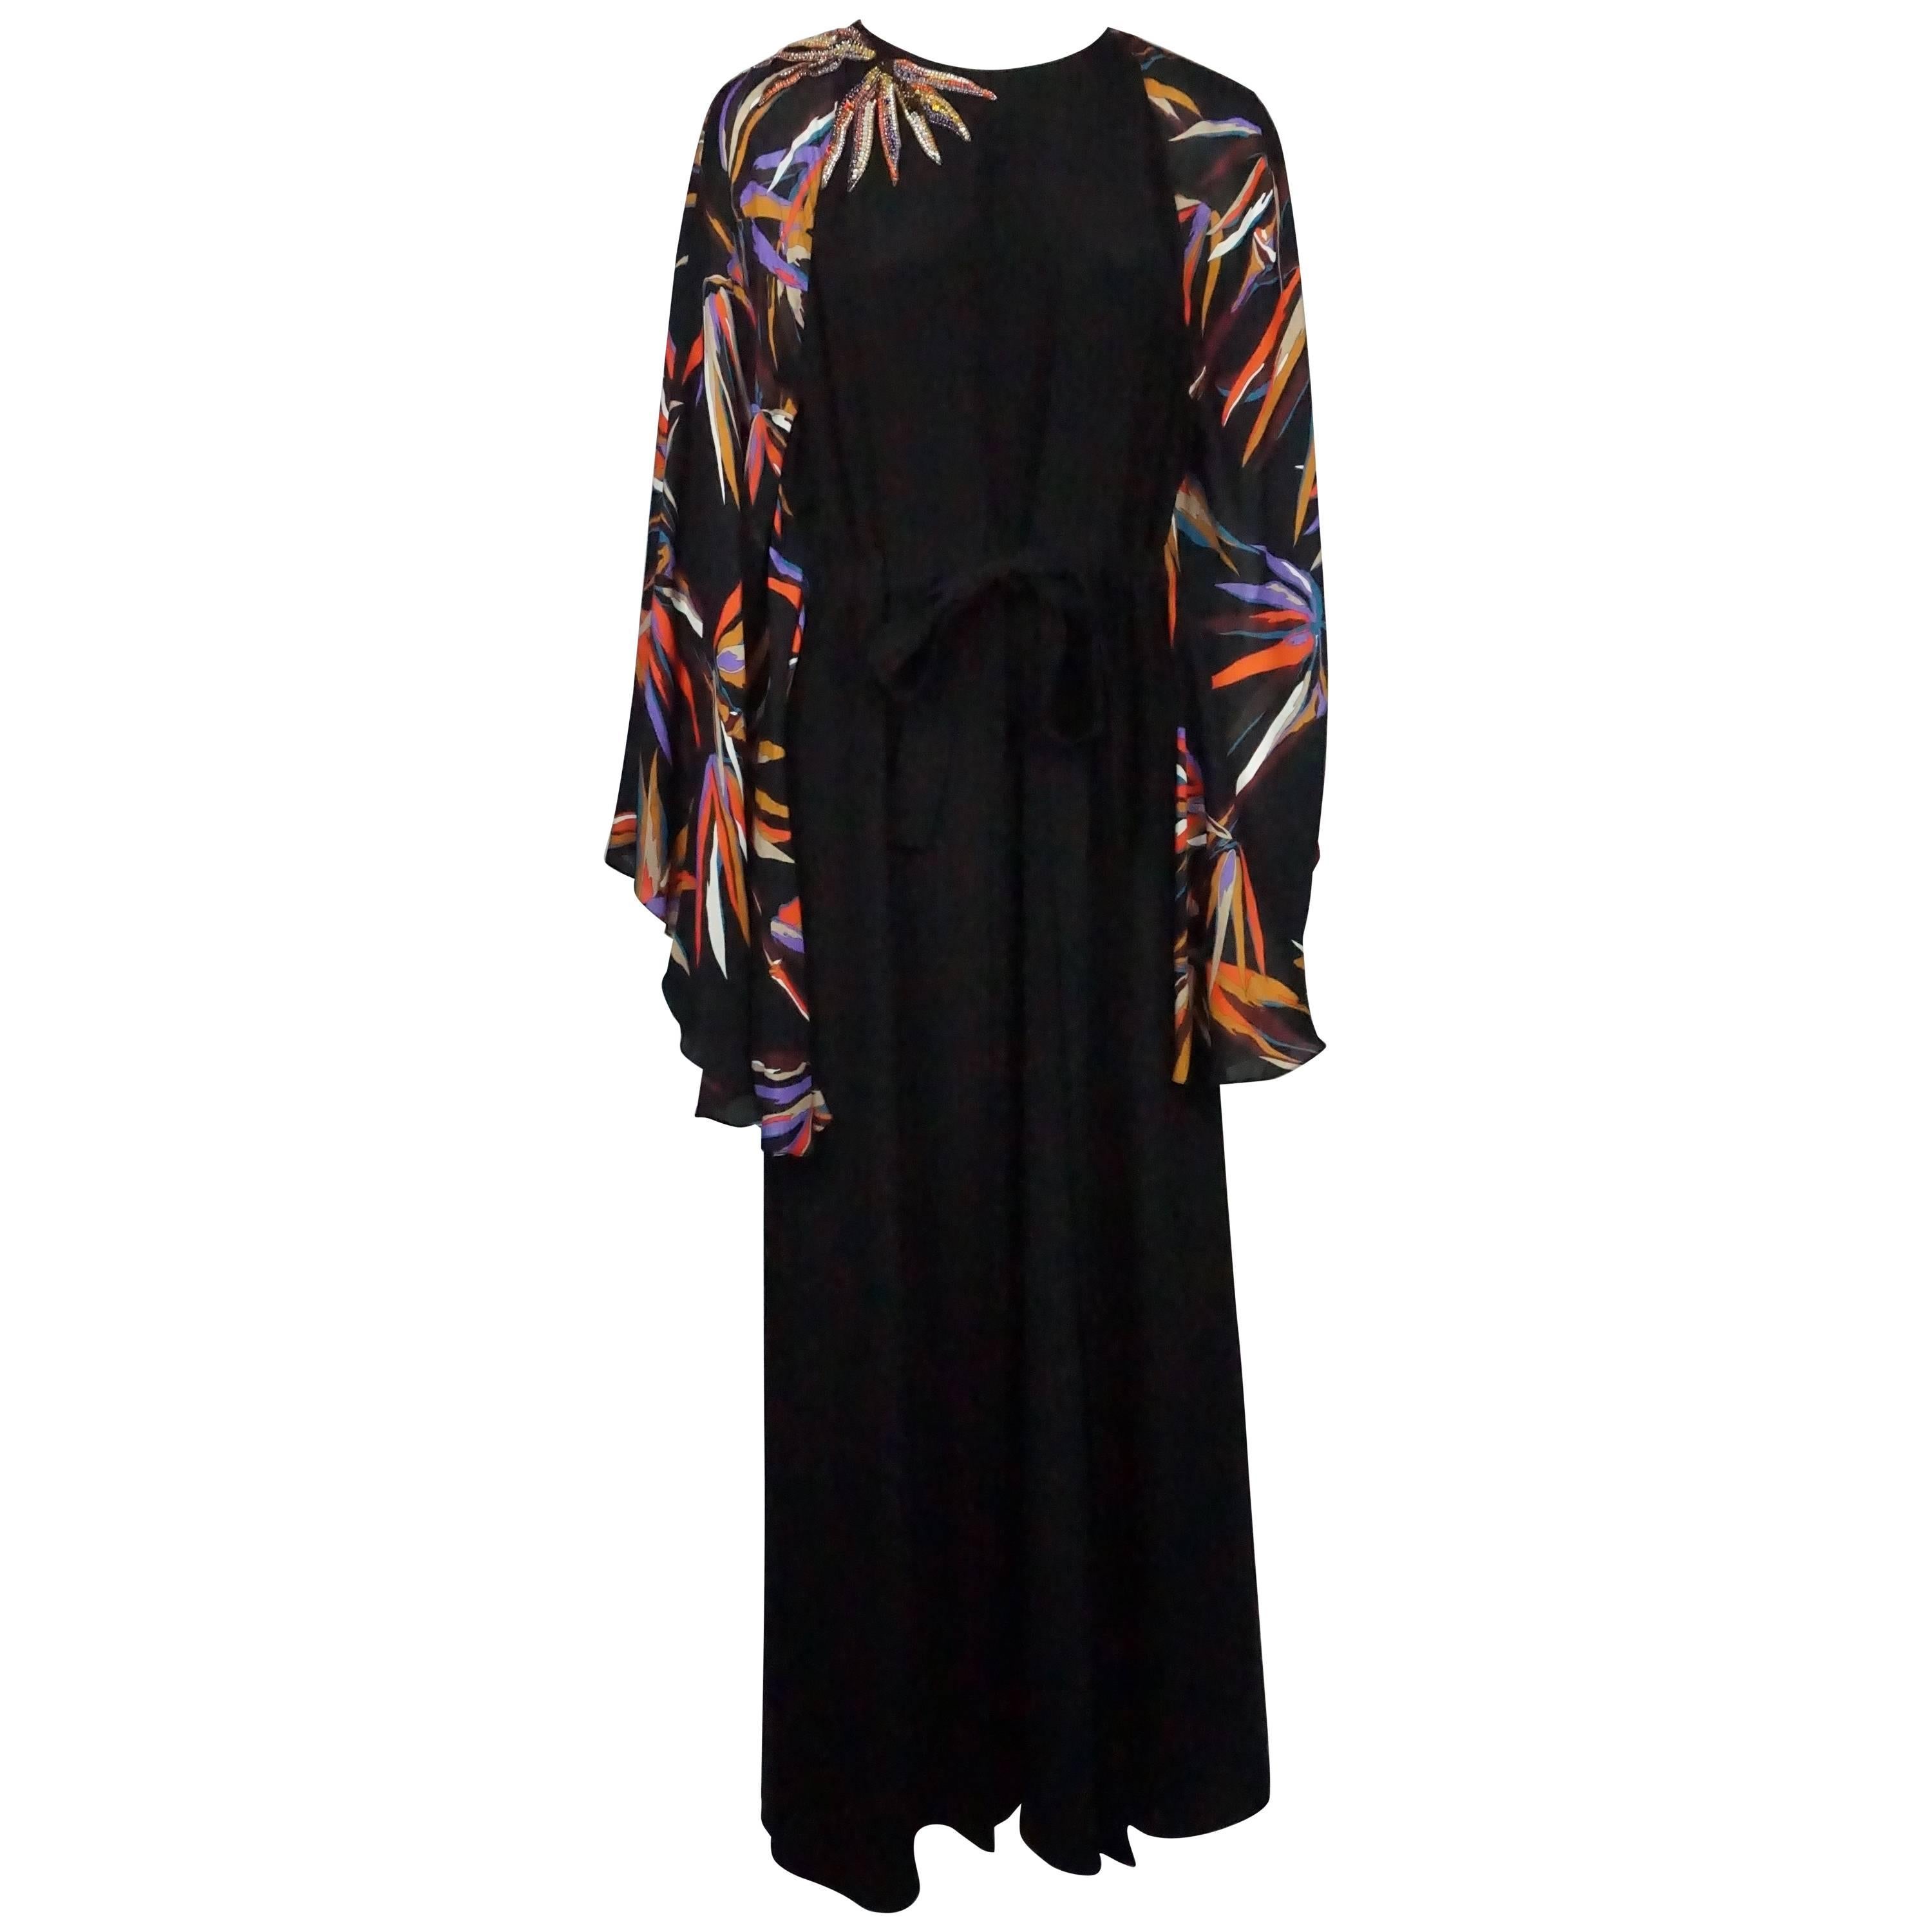 Emilio Pucci Black and Multi Silk Beaded Gown - 48